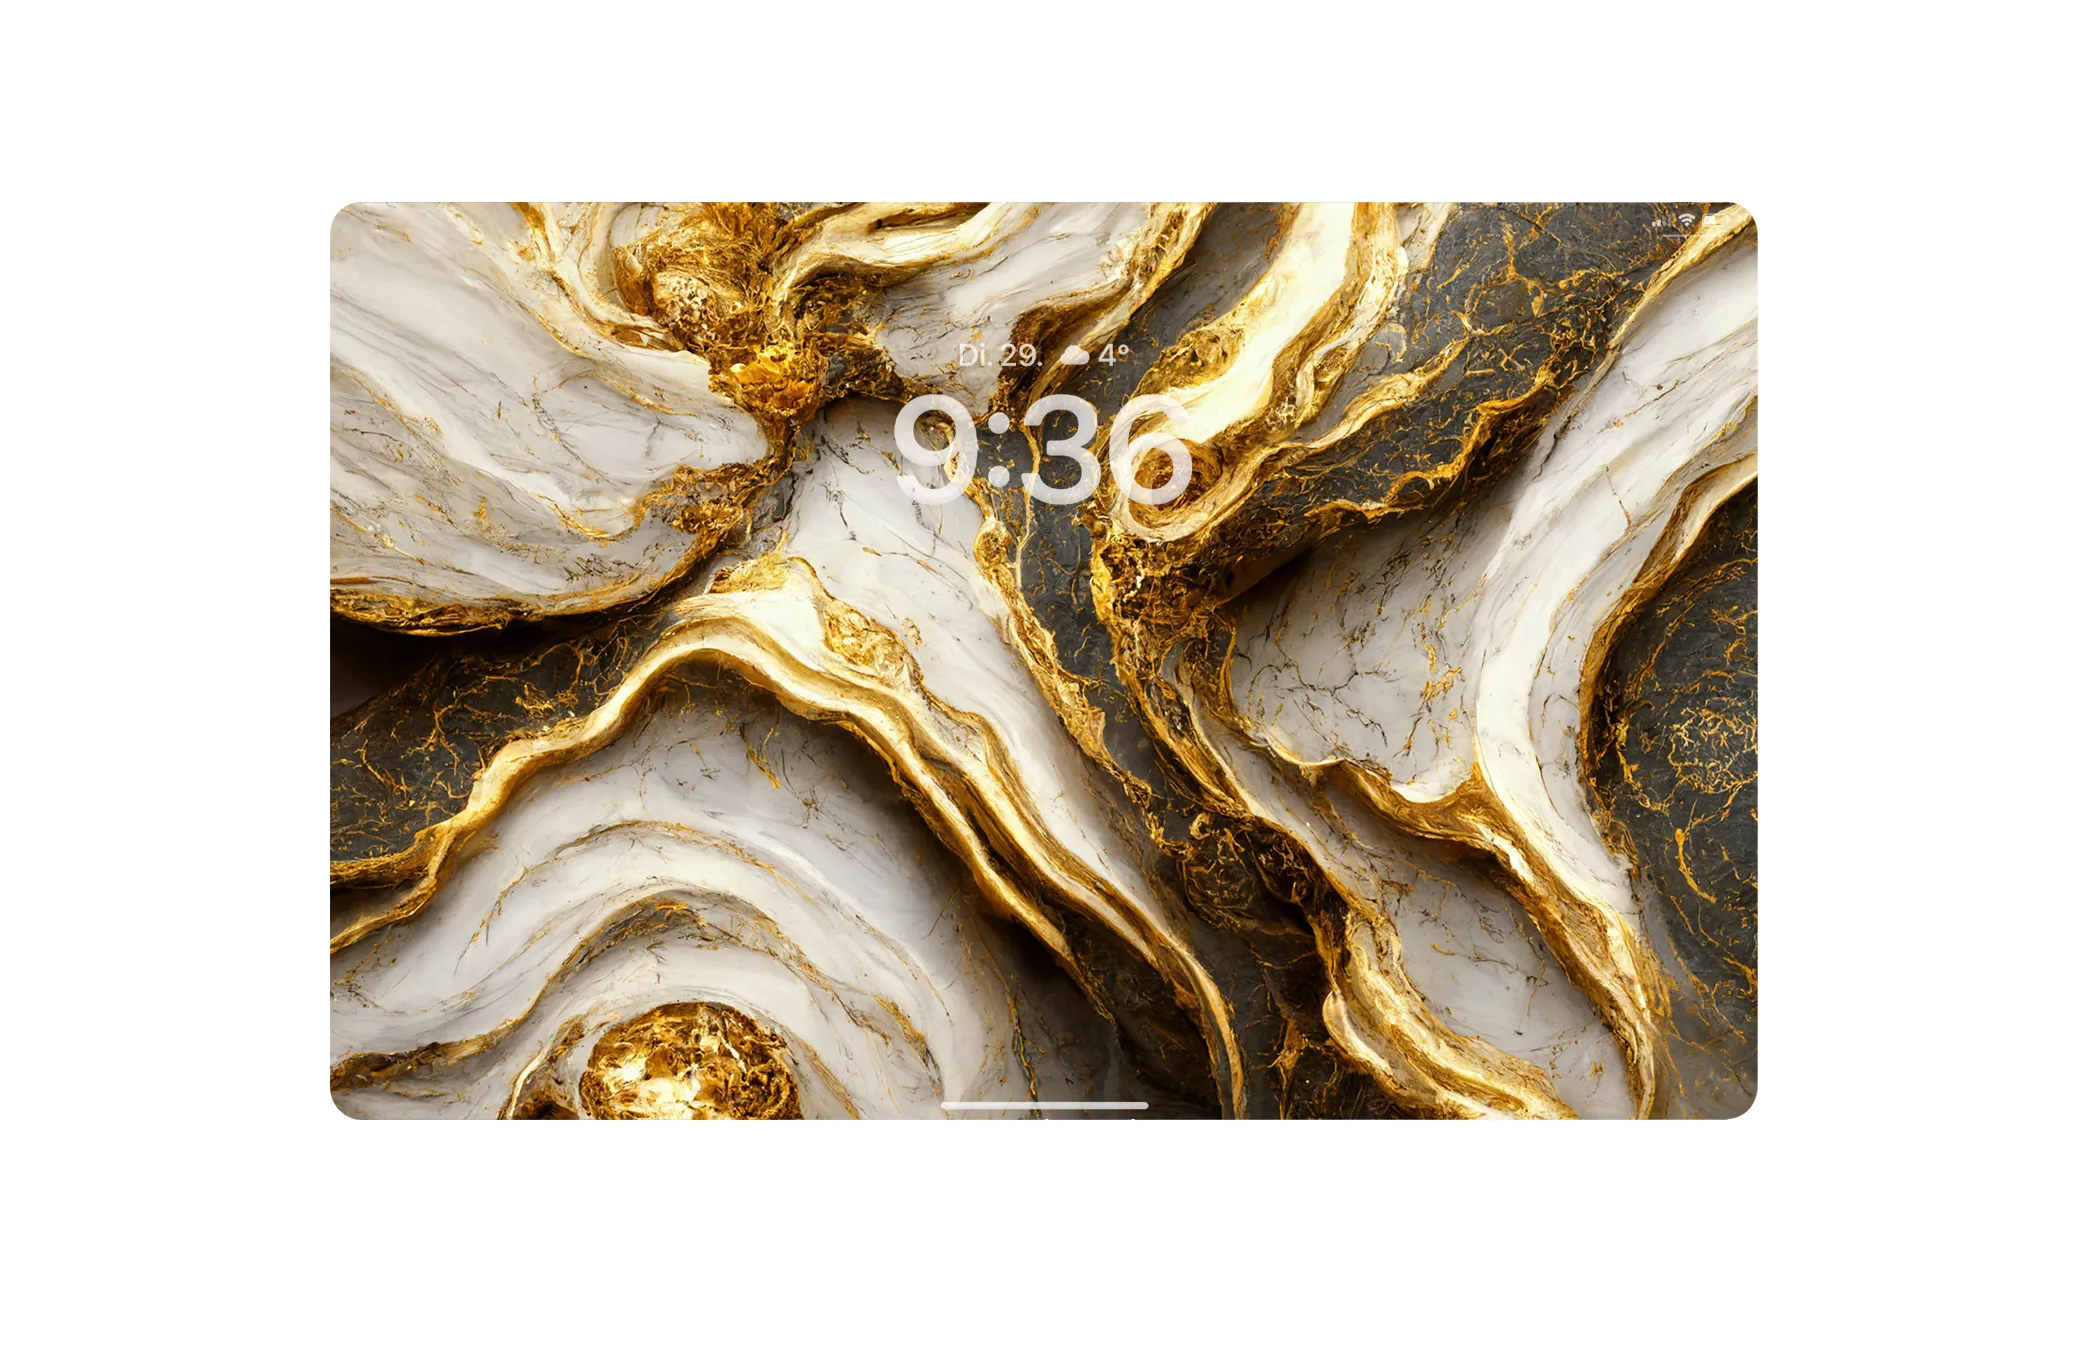 Free high resolution 4k luxury backgrounds for MacBook, MacBook Pro, MacBook Air and Ipad, Ipad Pro, Ipad Air, Ipad mini backgrounds.